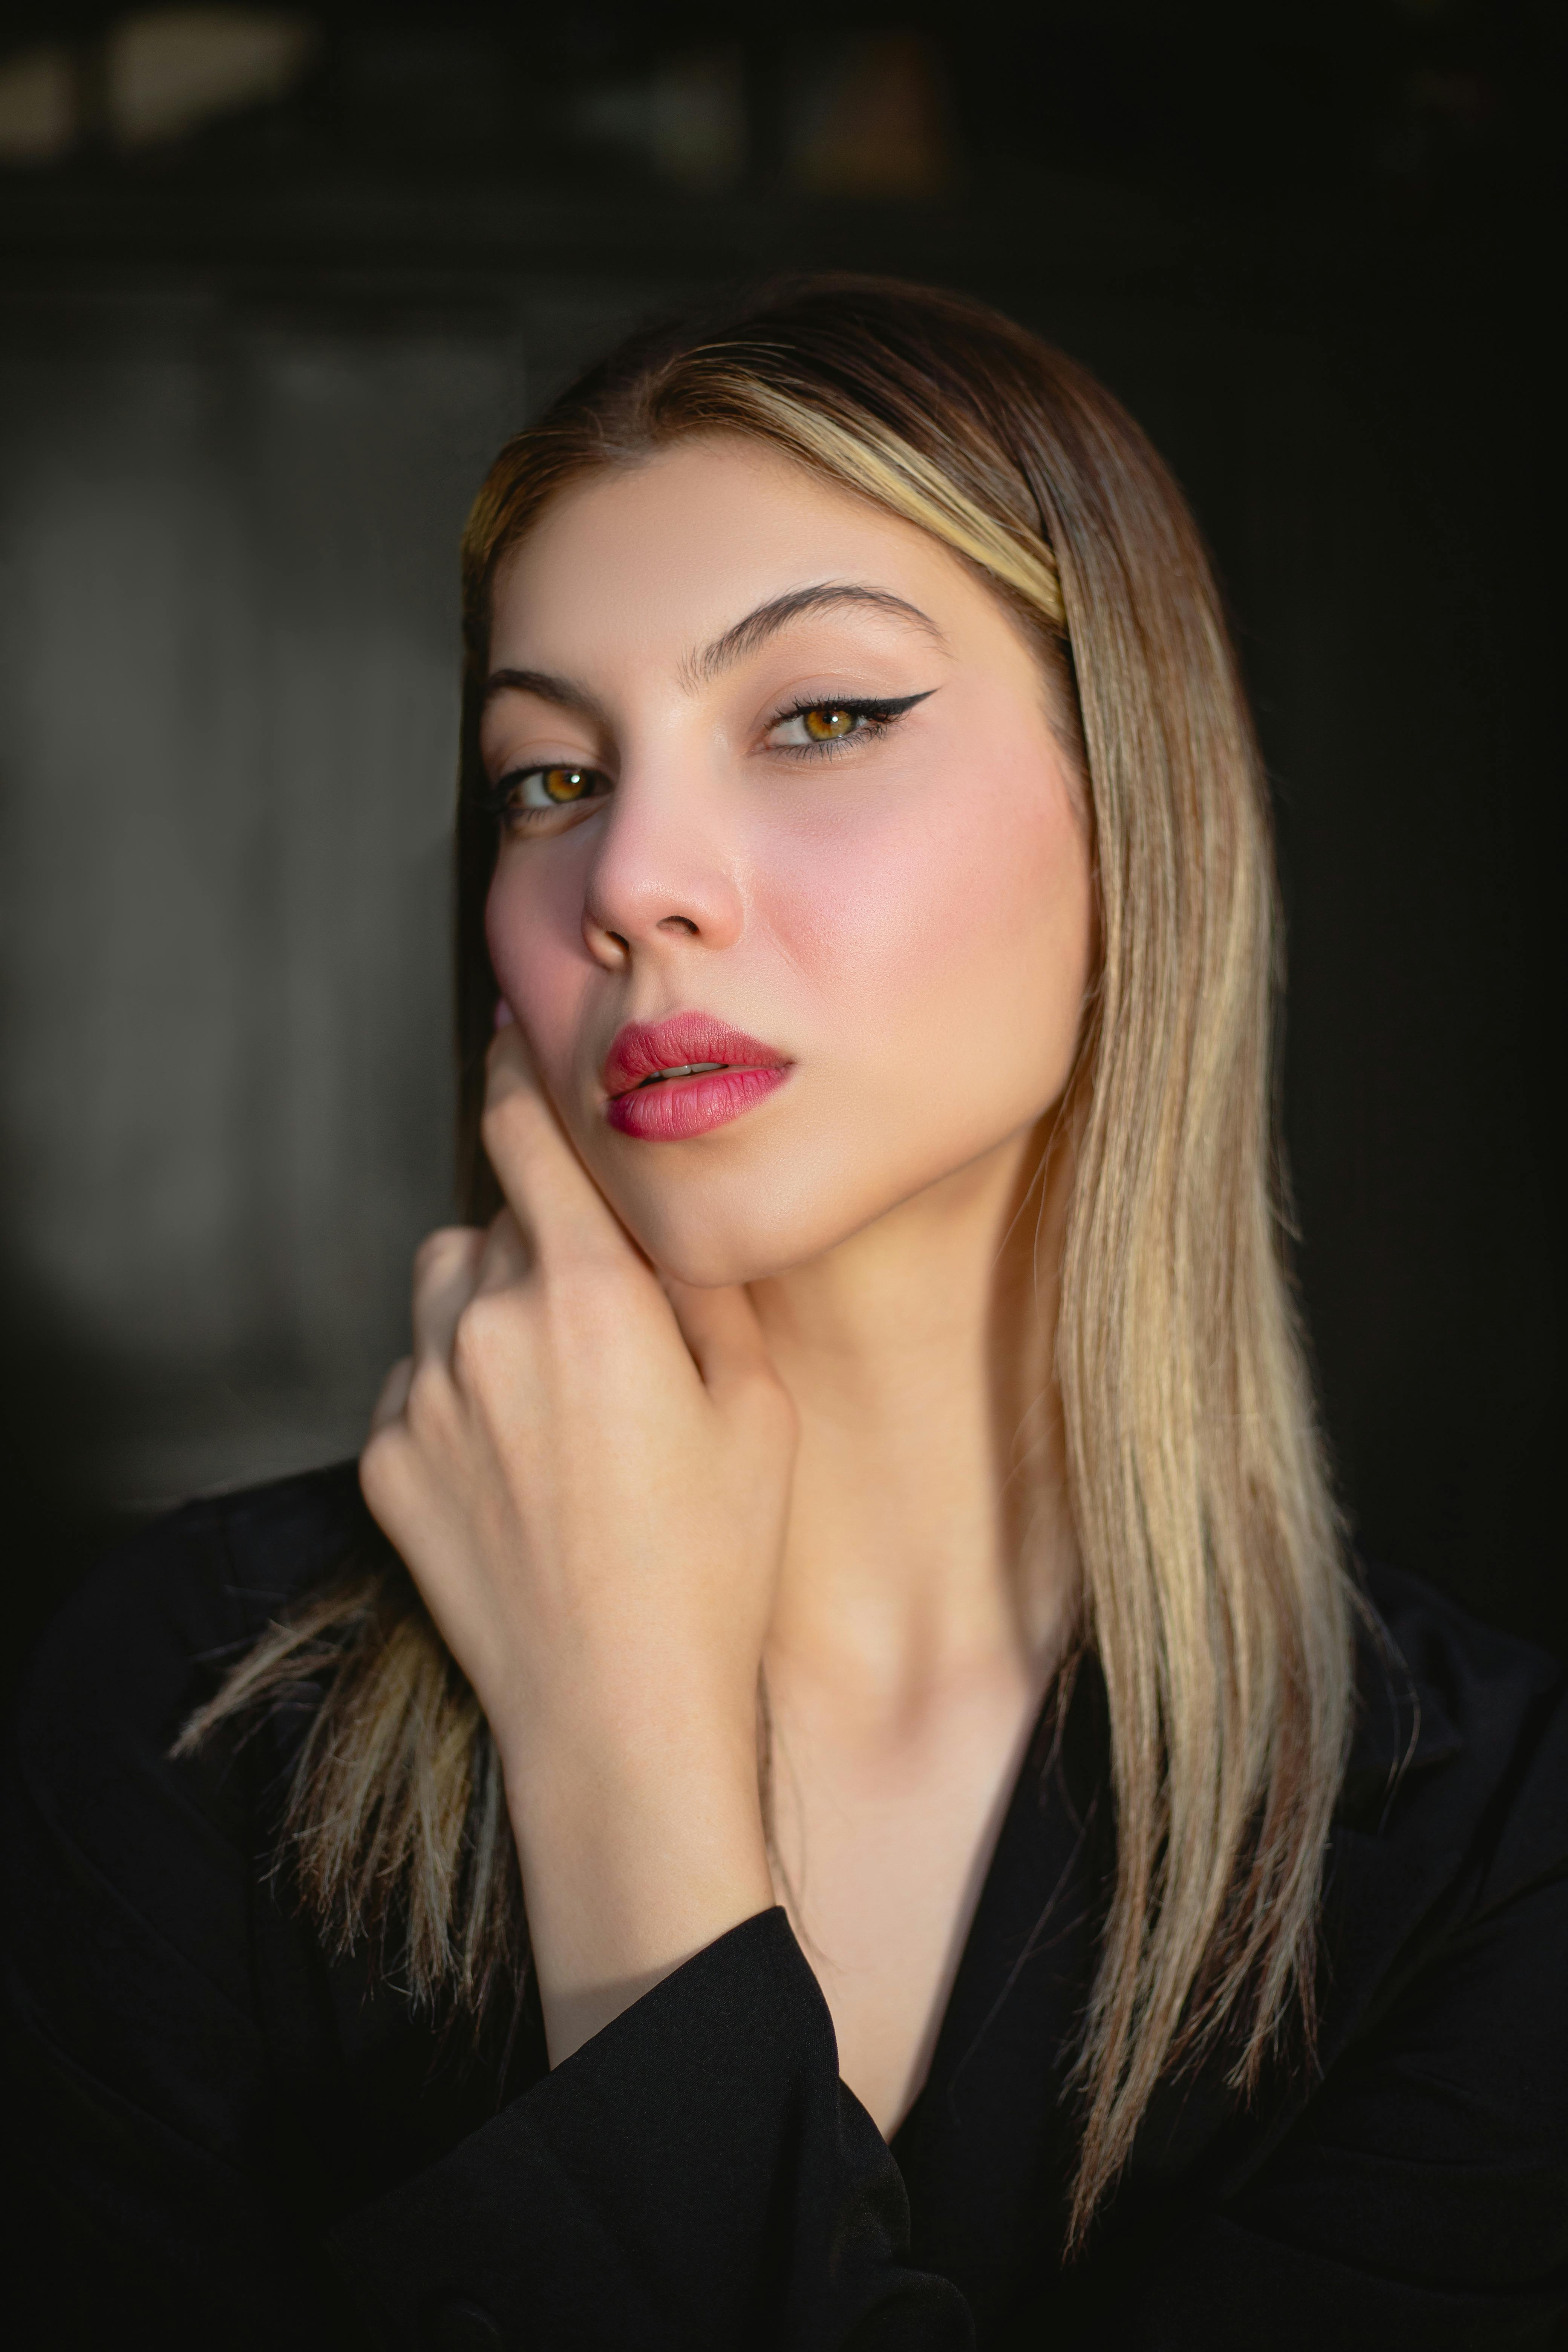 Face of Model Illuminated with Flame · Free Stock Photo